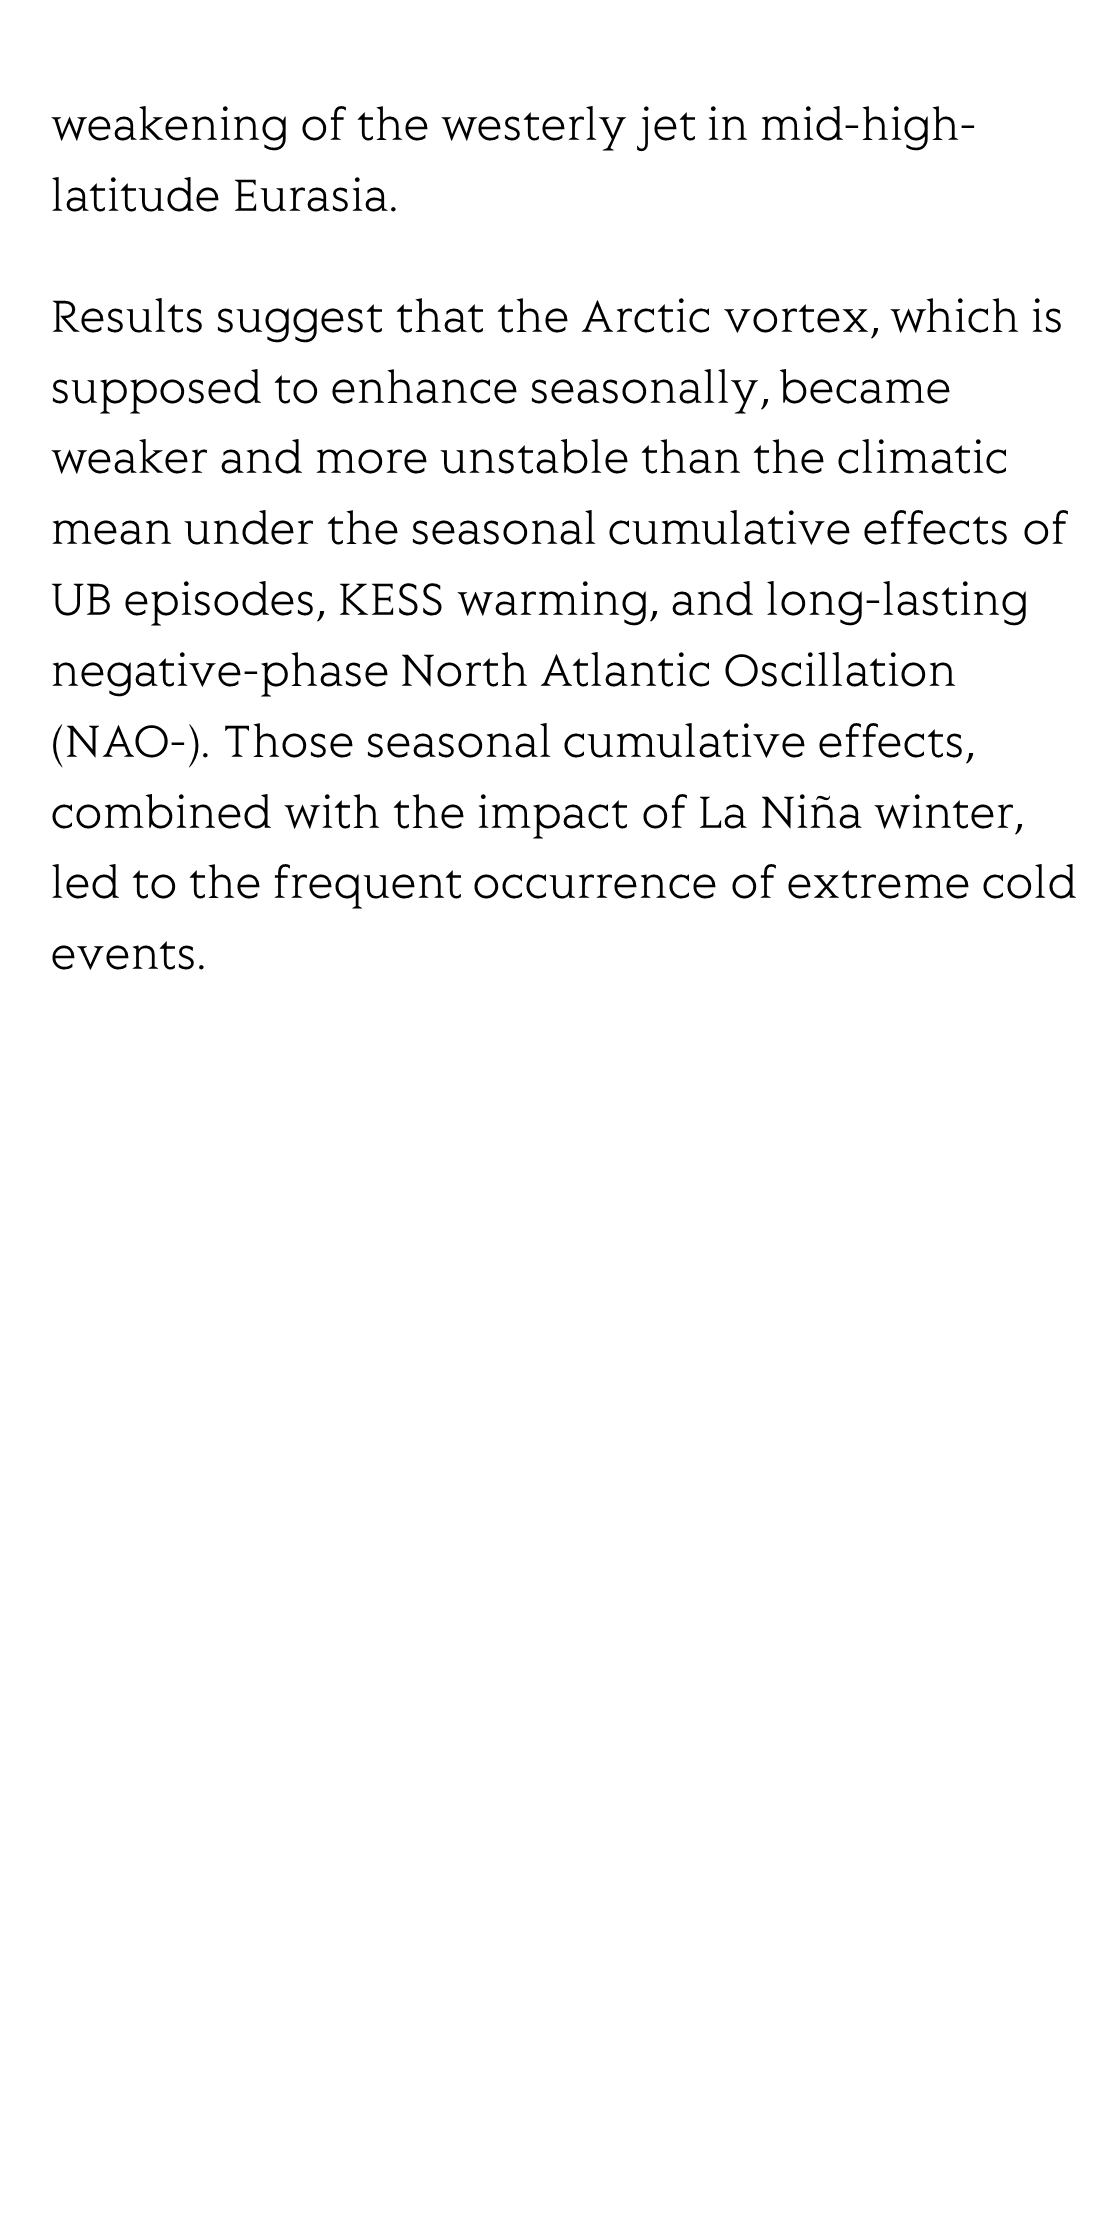 Seasonal Cumulative Effect of Ural Blocking Episodes on the Frequent Cold events in China during the Early Winter of 2020/21_3